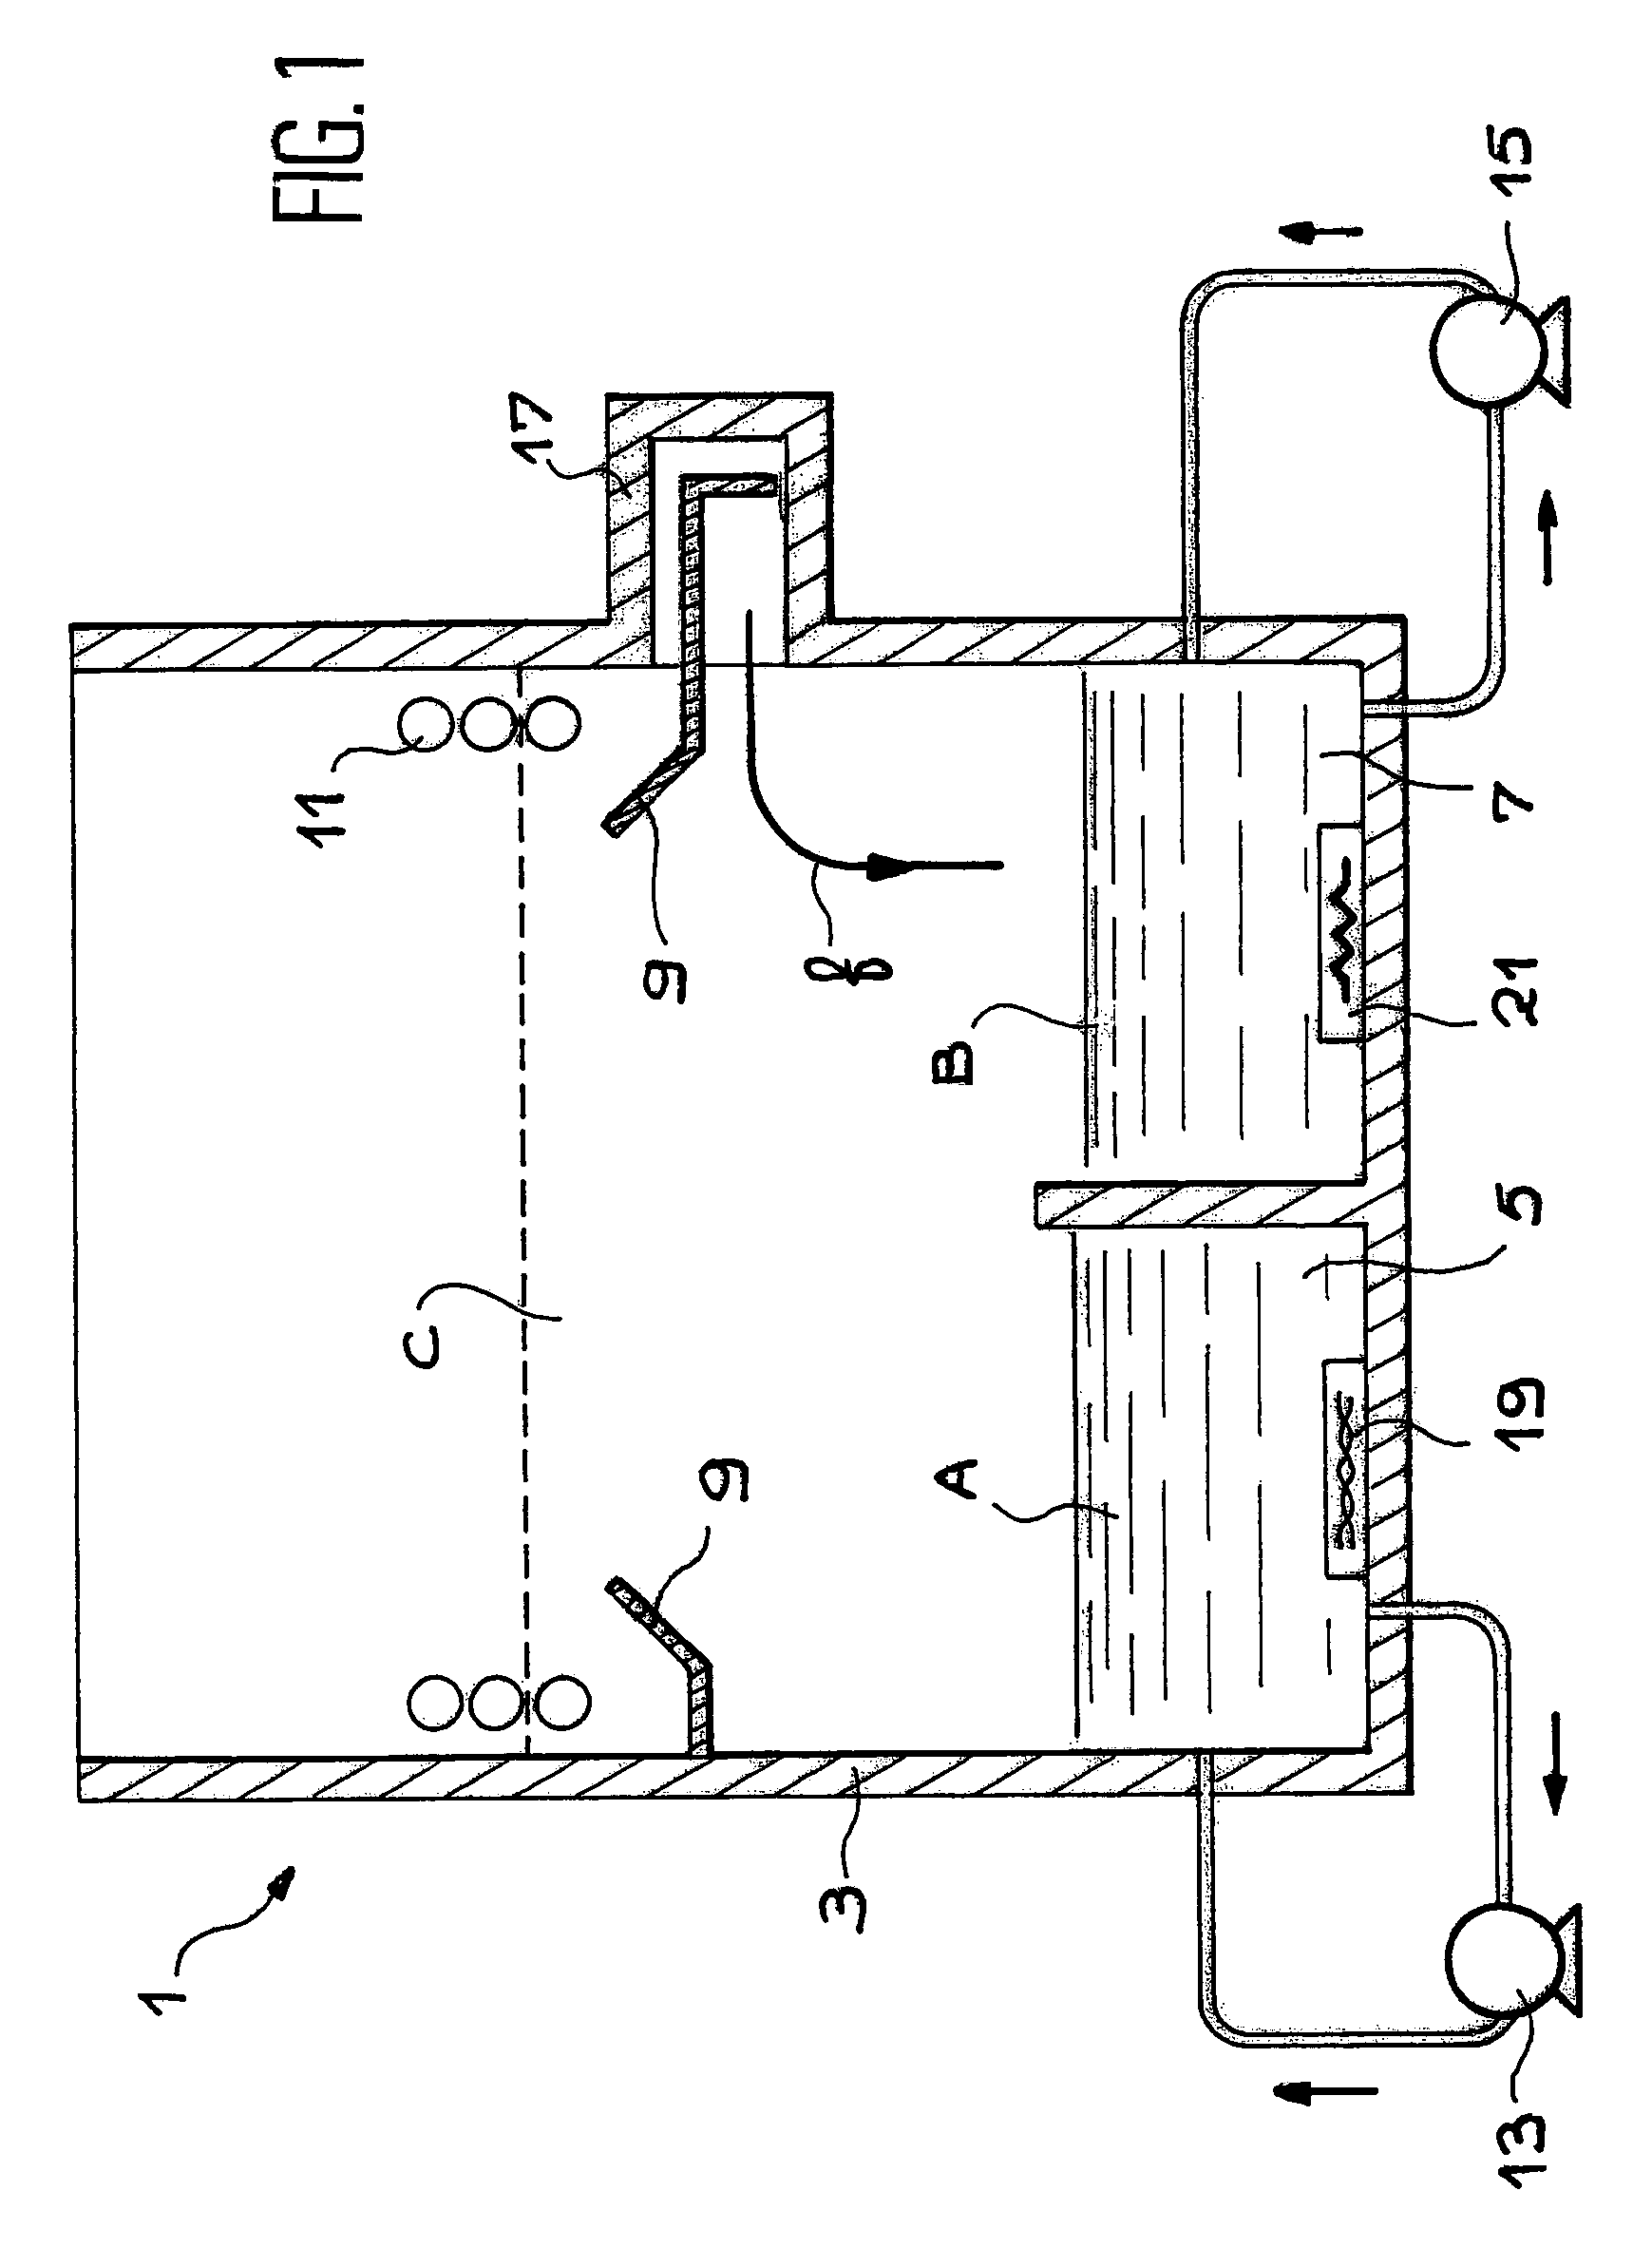 Grease removing method and device